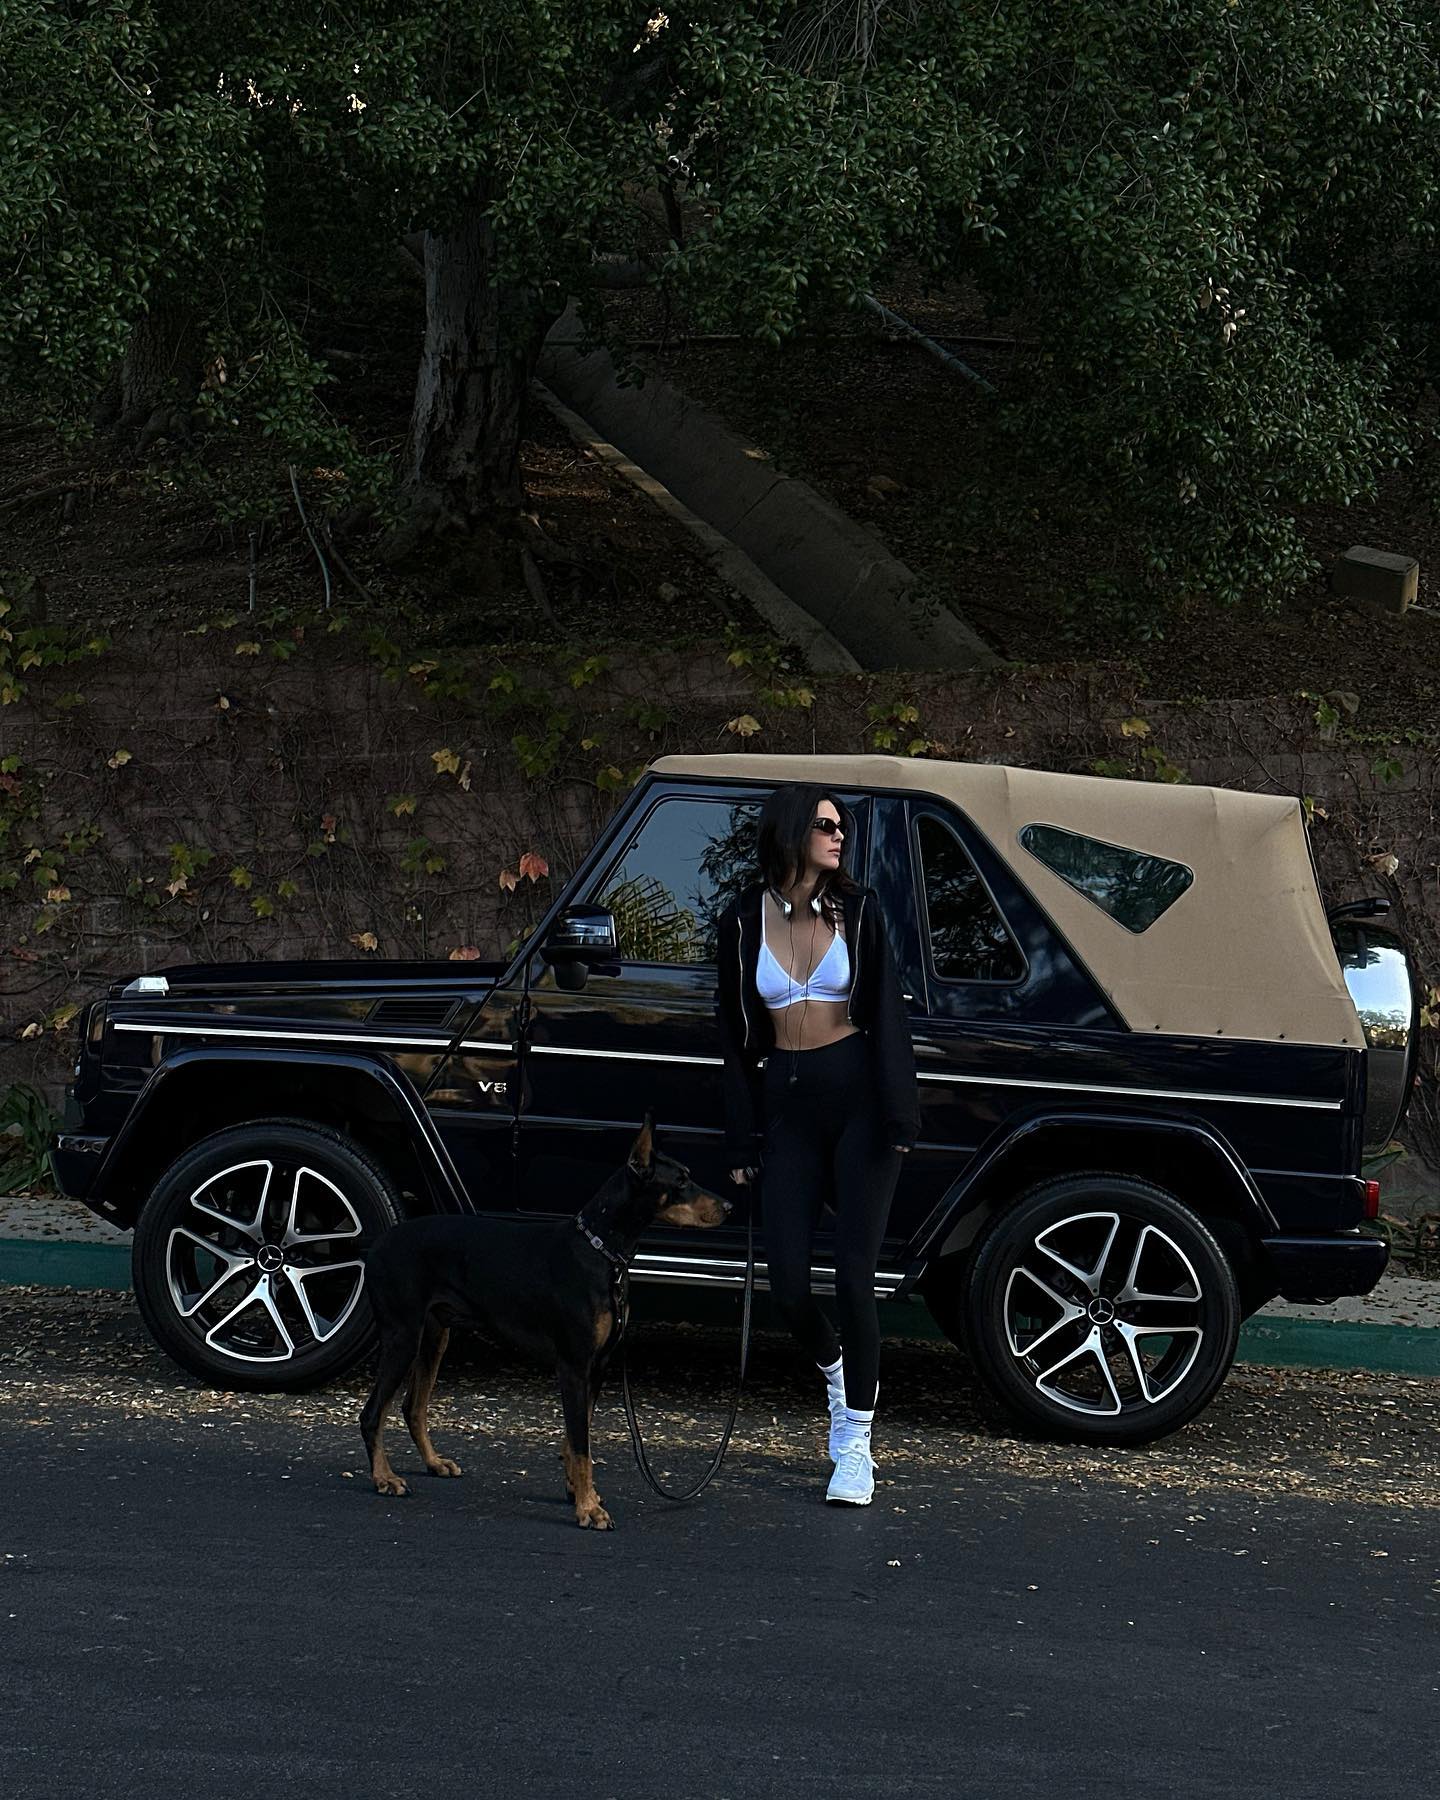 Kendall was also photographed walking her dog, Pyro